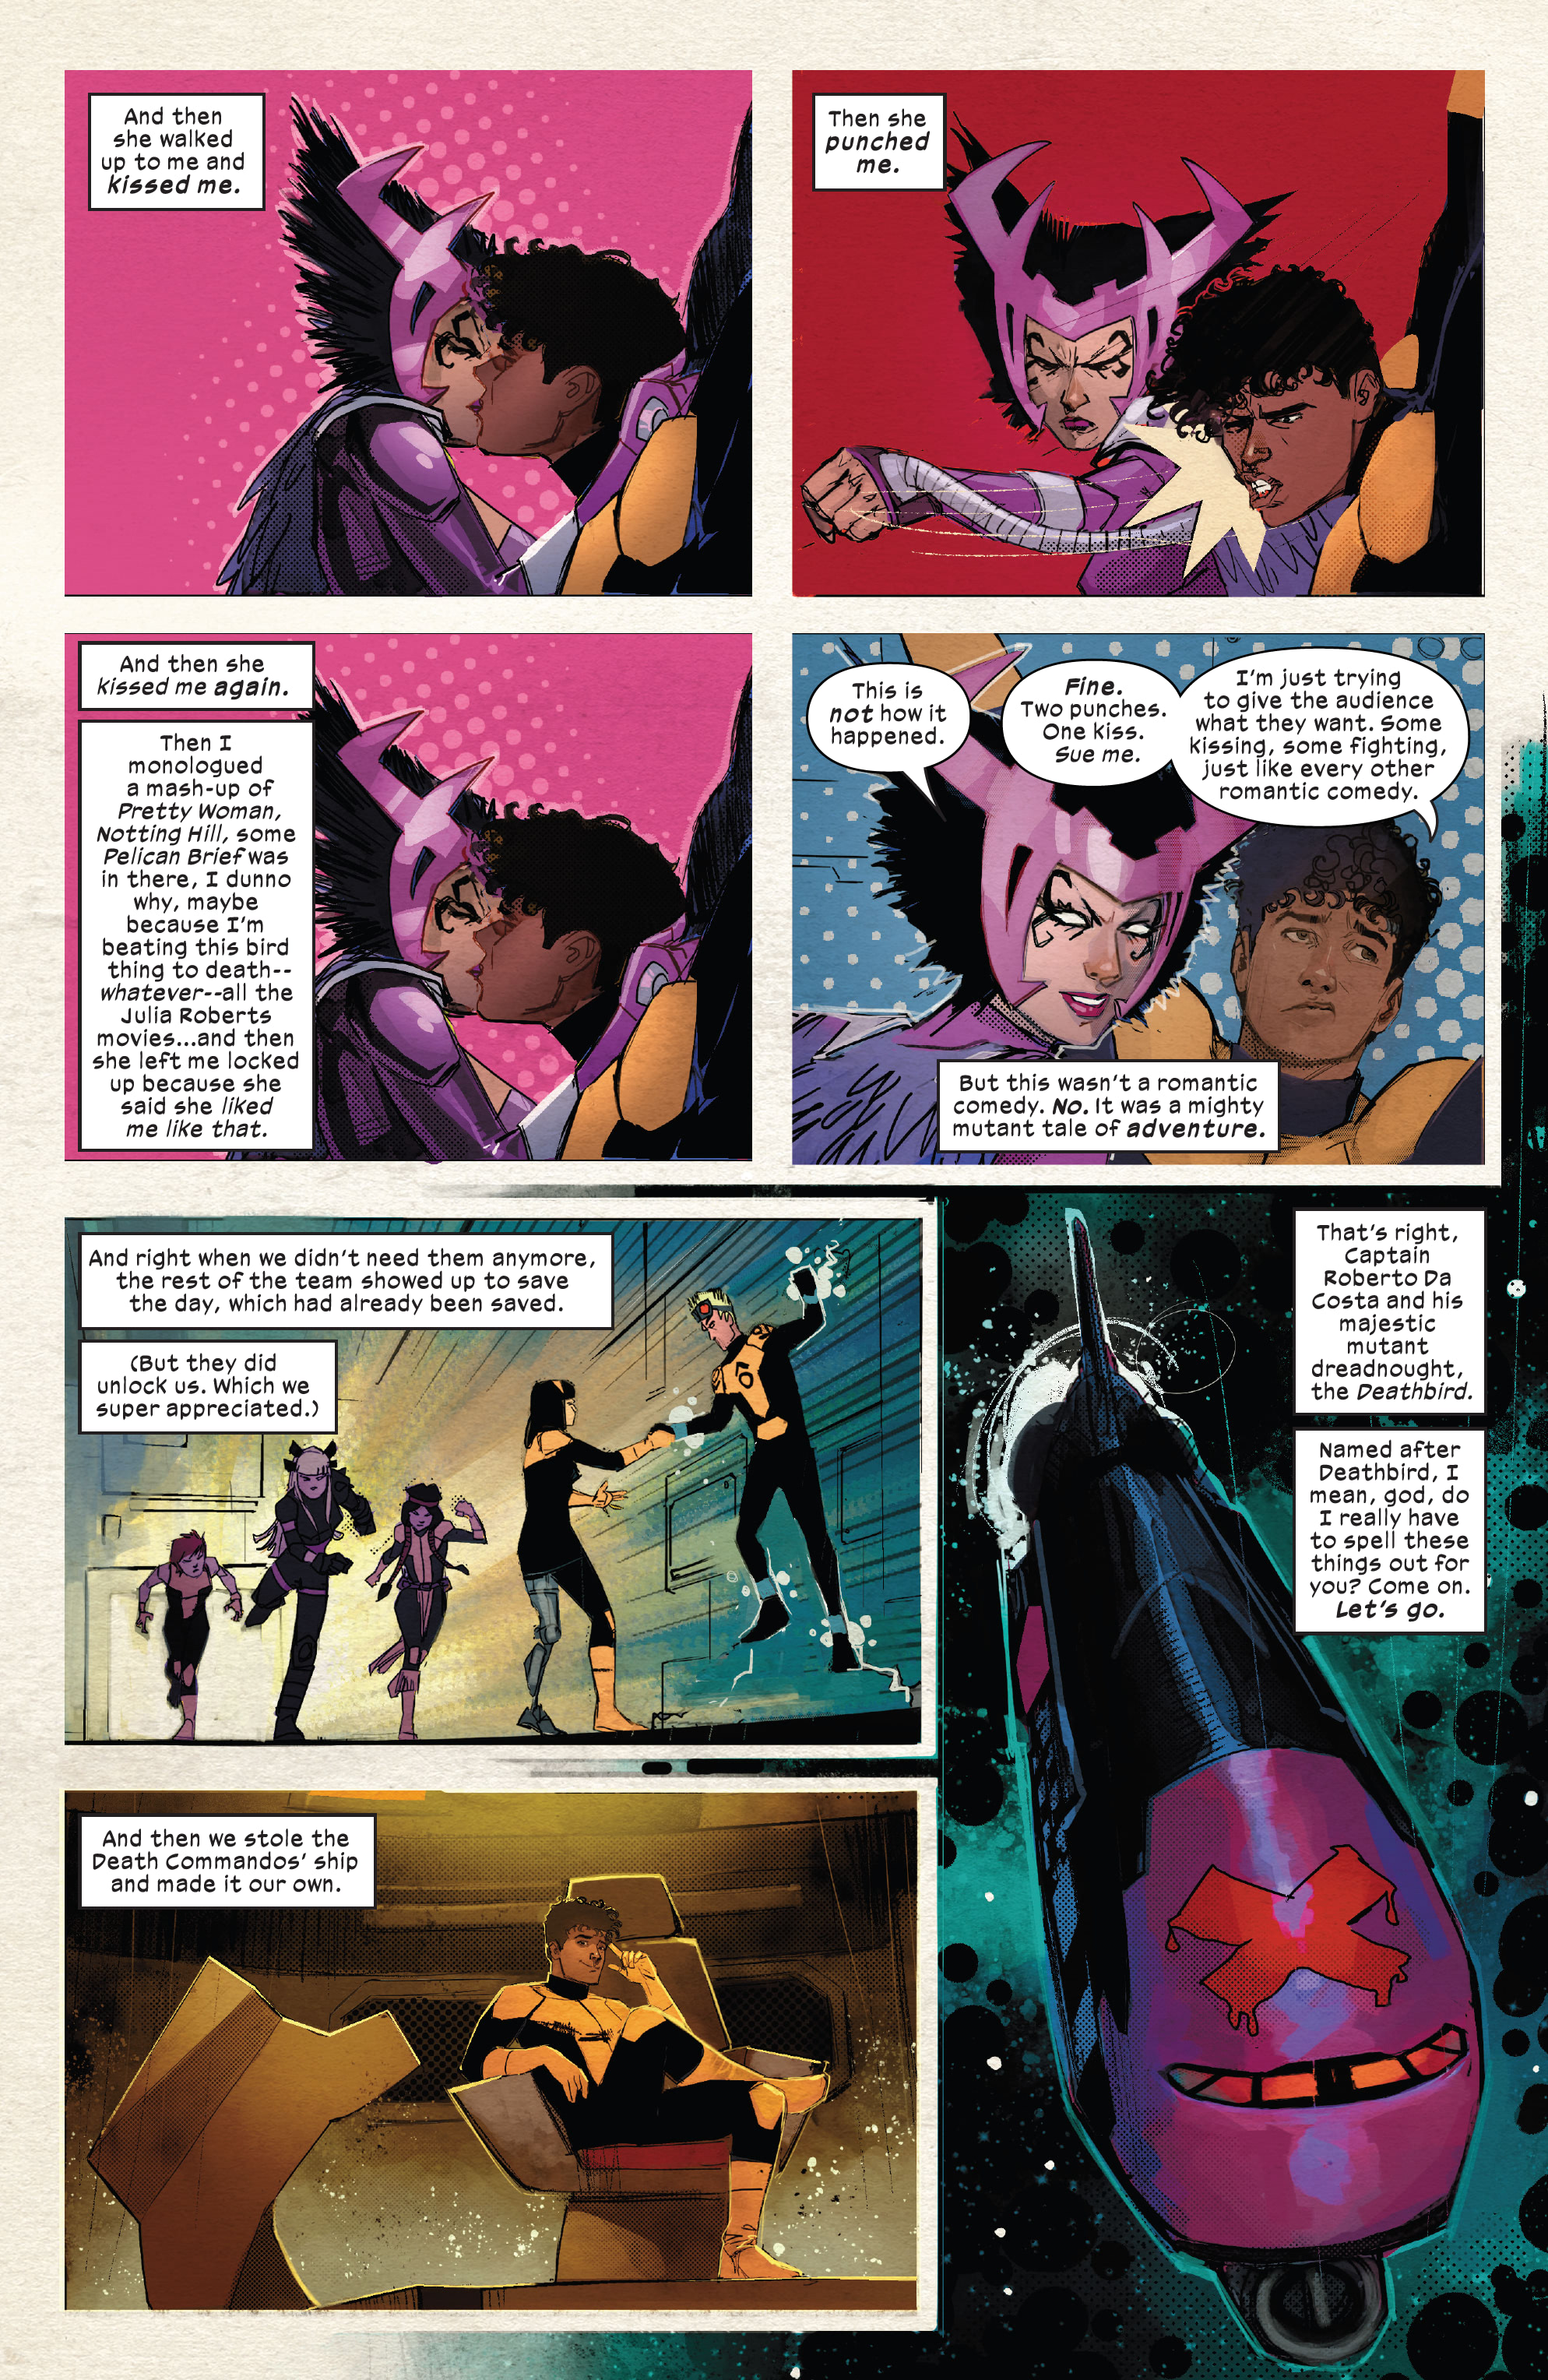 New Mutants (2019-): Chapter 7 - Page 4